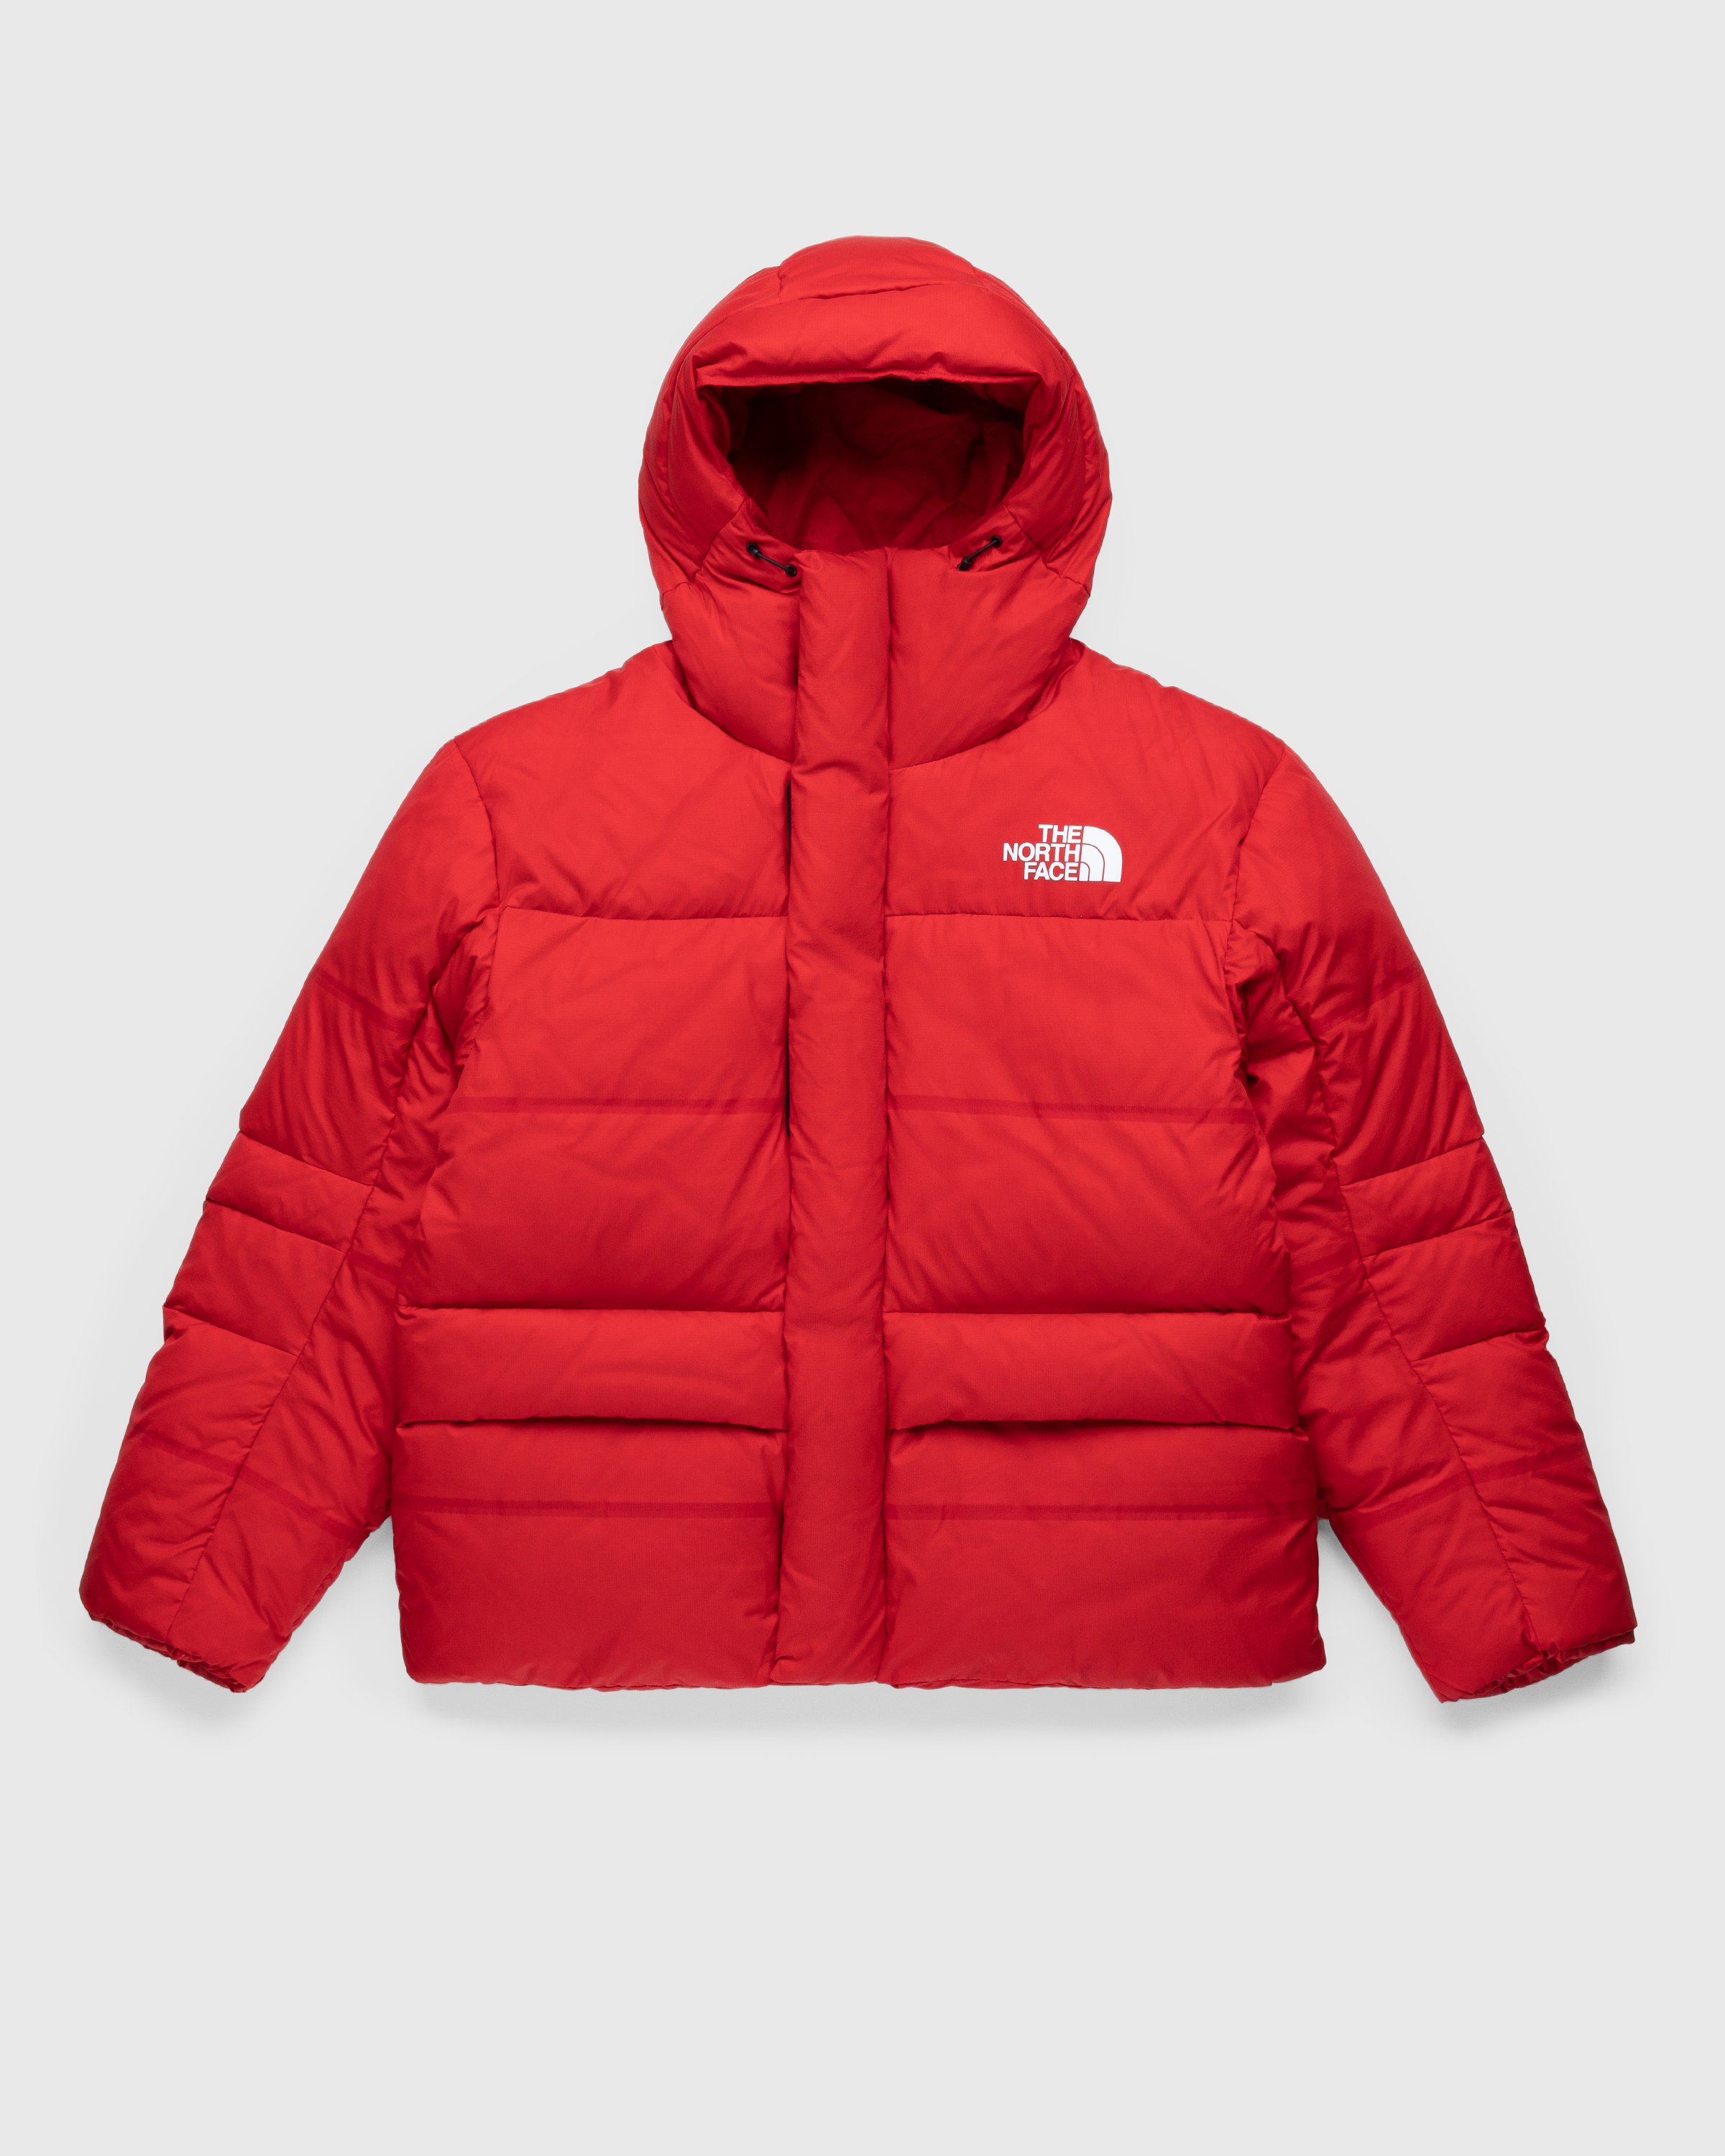 The North Face RMST Parka Red | Highsnobiety Shop